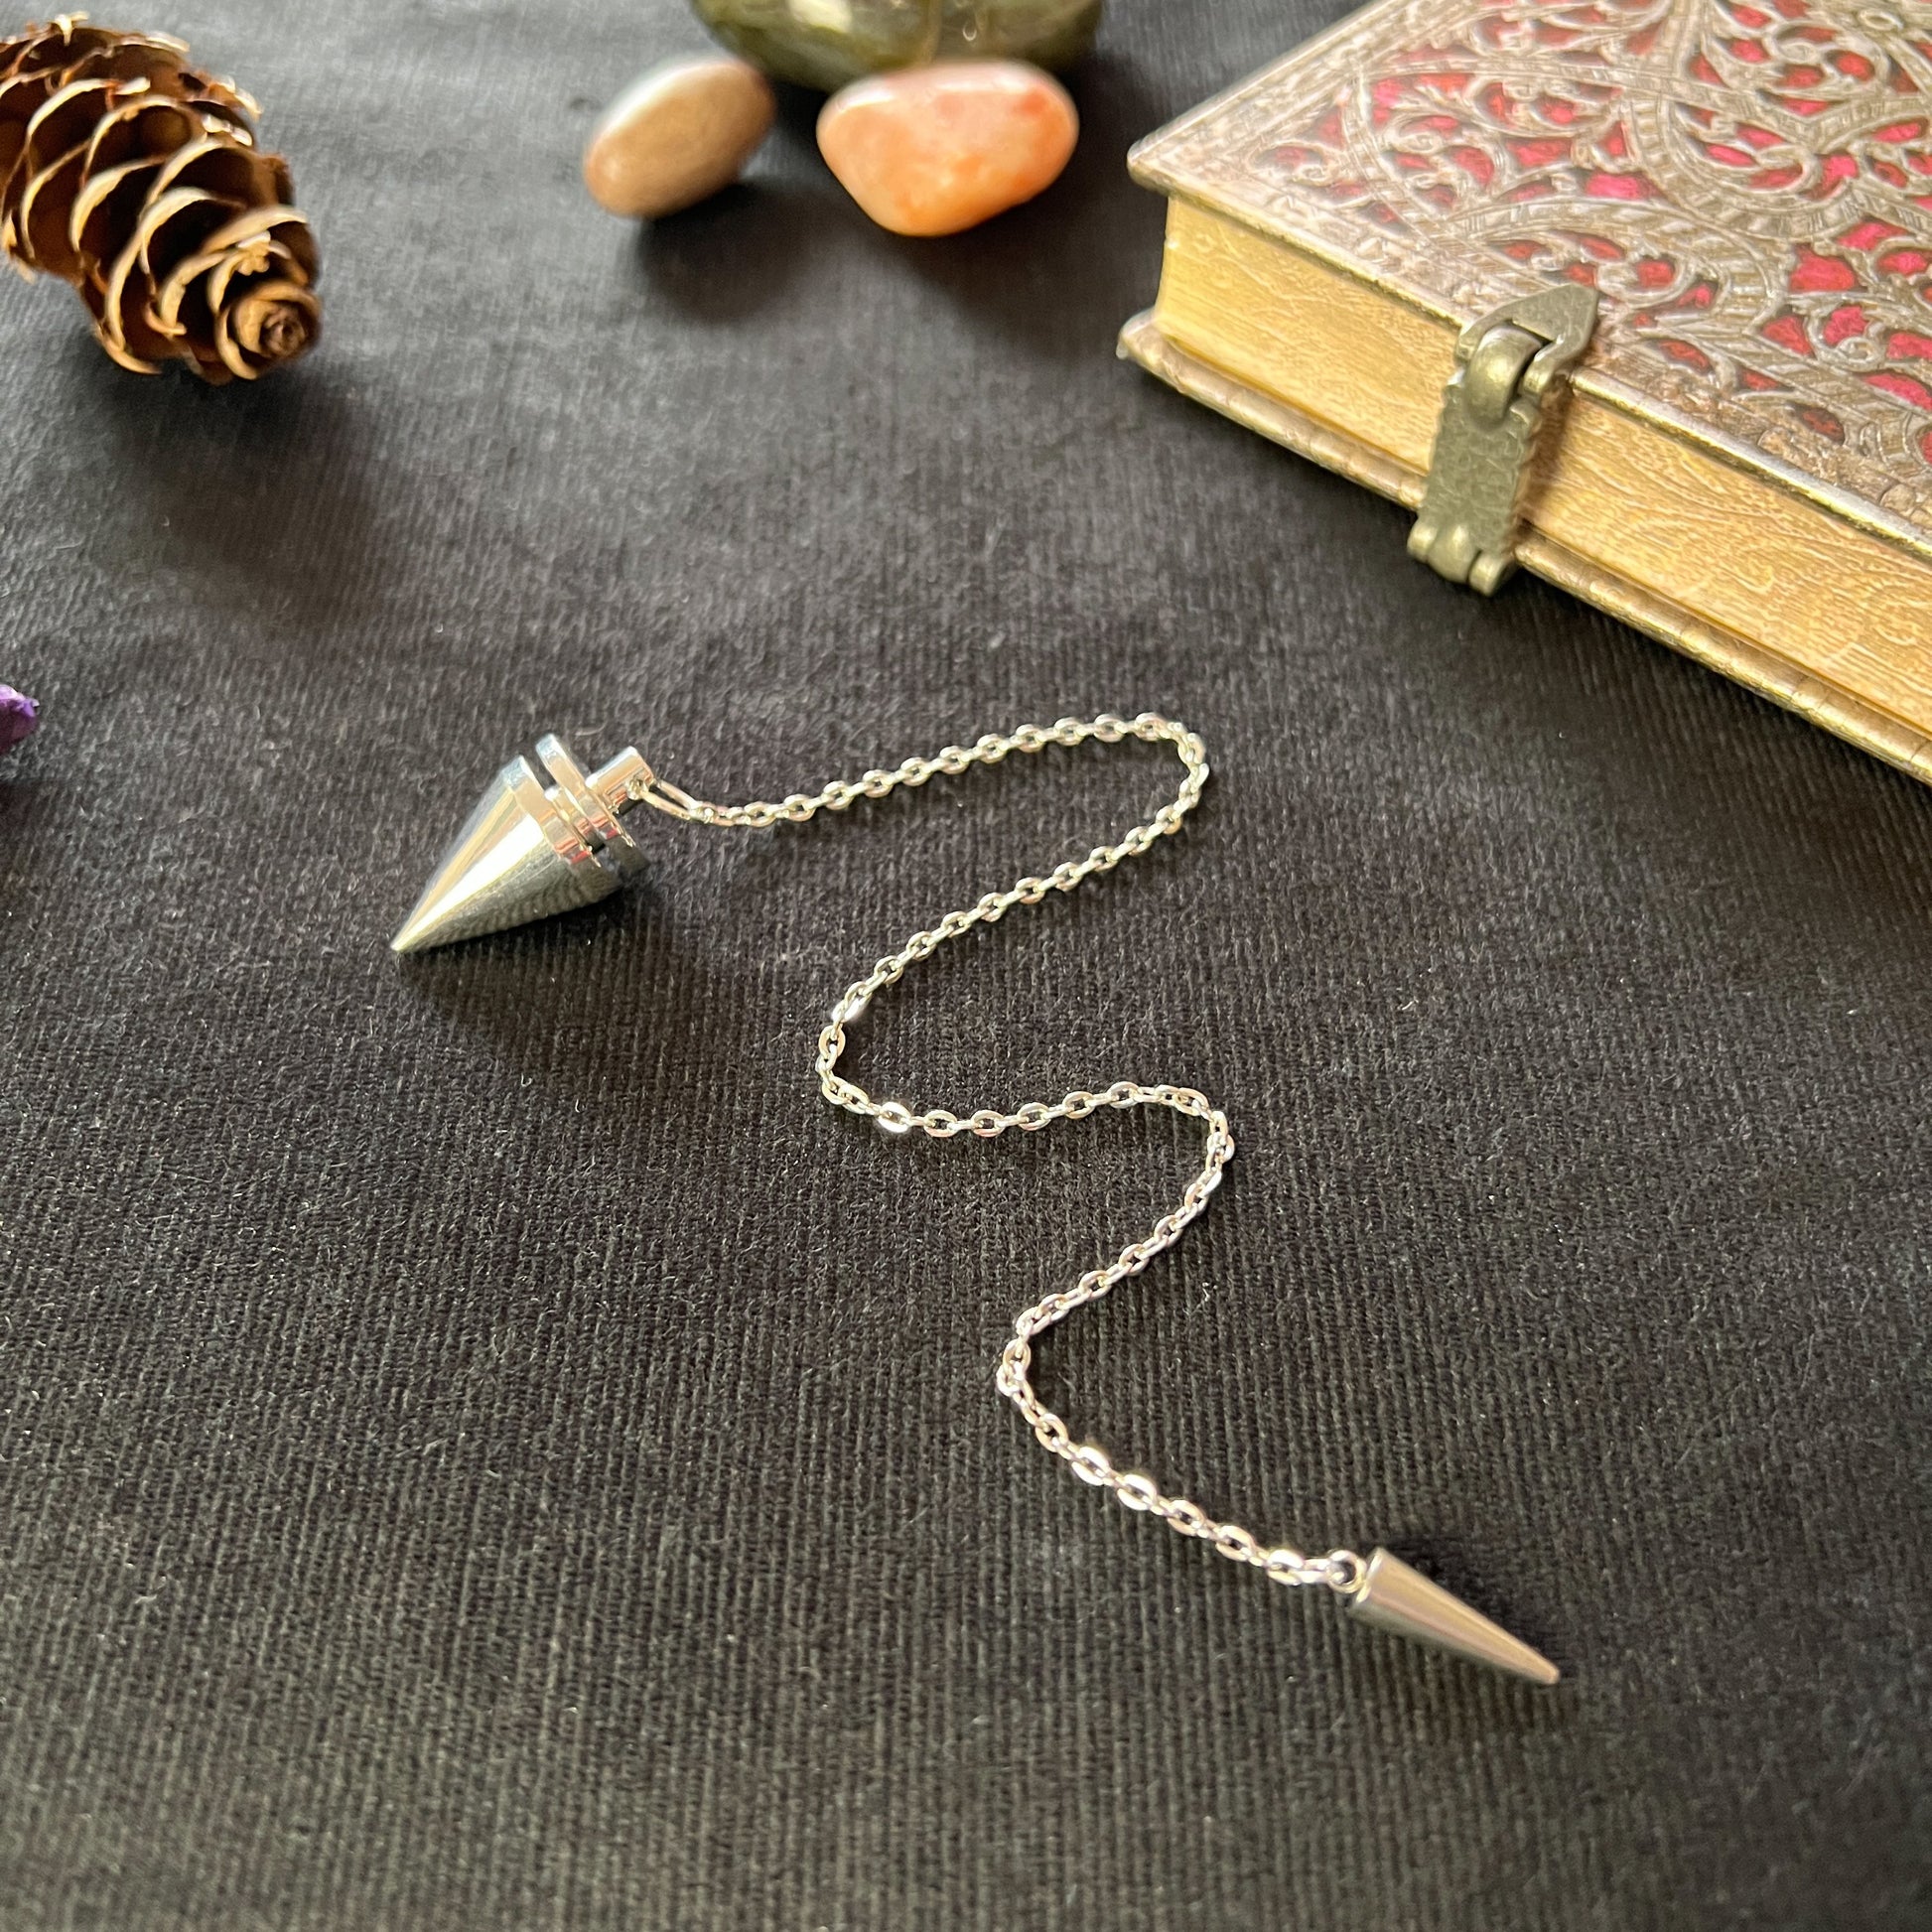 Cone and coil divination pendulum elegant dowsing pendulum with a spike charm classic divination tool